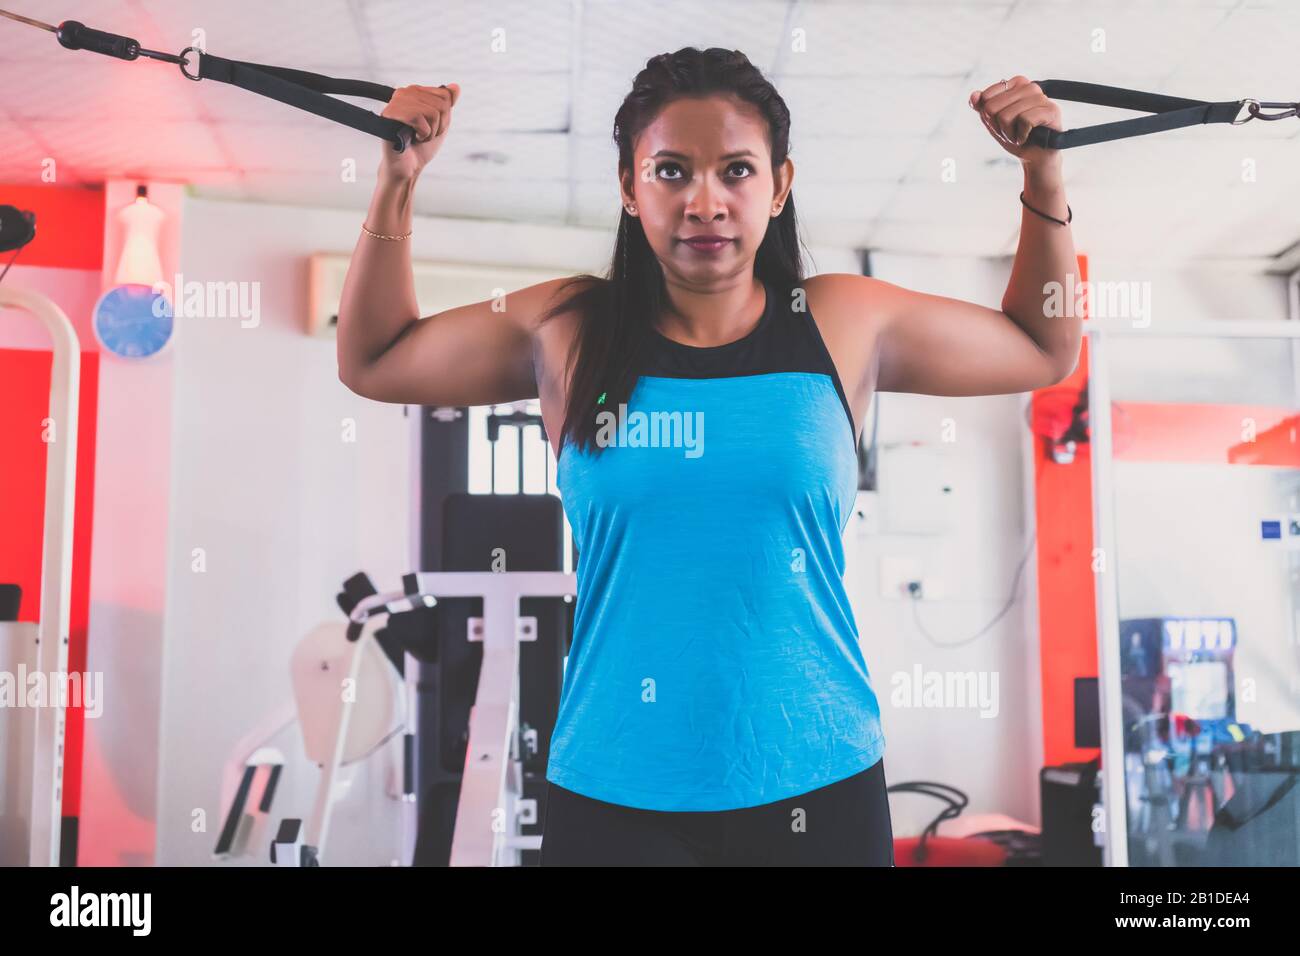 Young woman weight training at gym Stock Photo